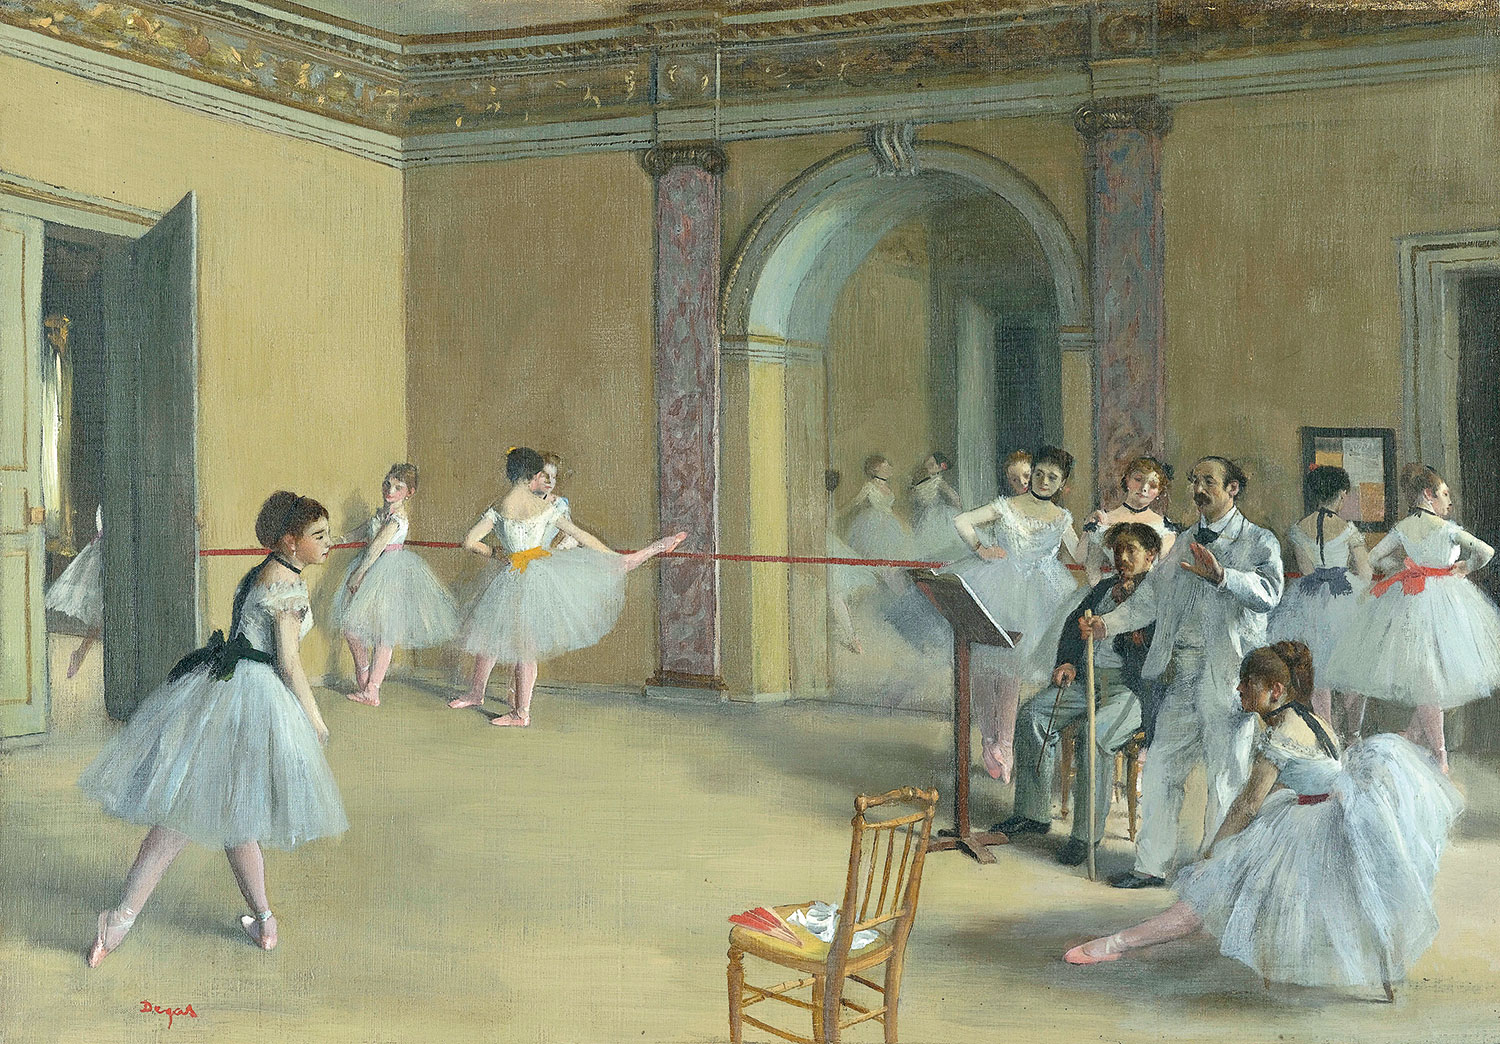 Edgar Degas, The Rehearsal, c. 1874 oil on canvas, 58.4 x 83.8 cm Burrell Collection, Glasgow Gift from Sir William and Lady Burrell to the City of Glasgow, 1944 (35.246) © CSG CIC Glasgow Museums Collection